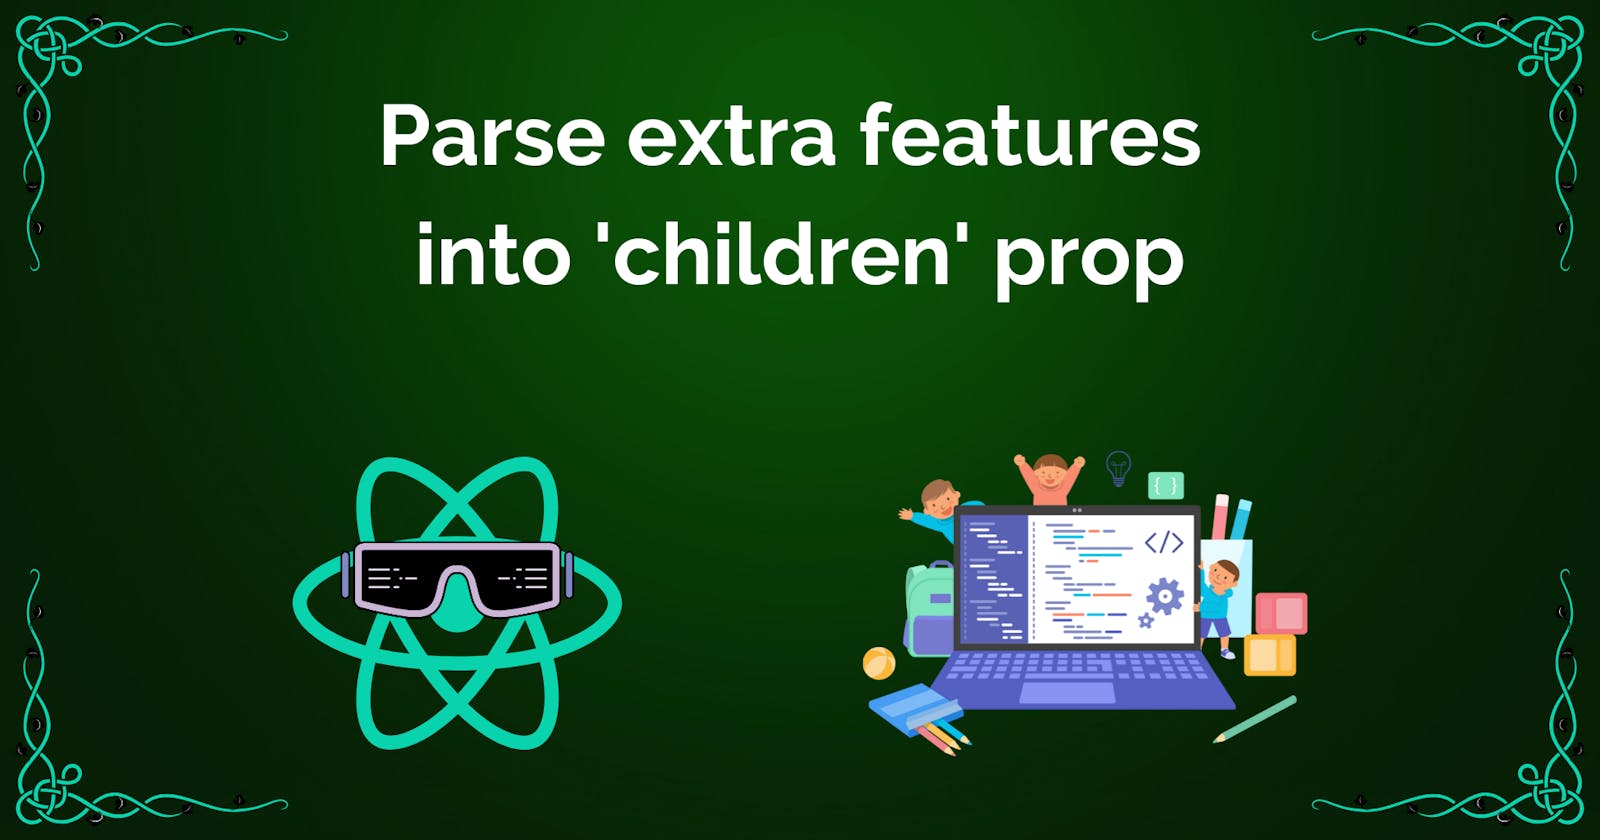 Using the 'children' Prop as a Function: A New Way to Parse Extra Features in React